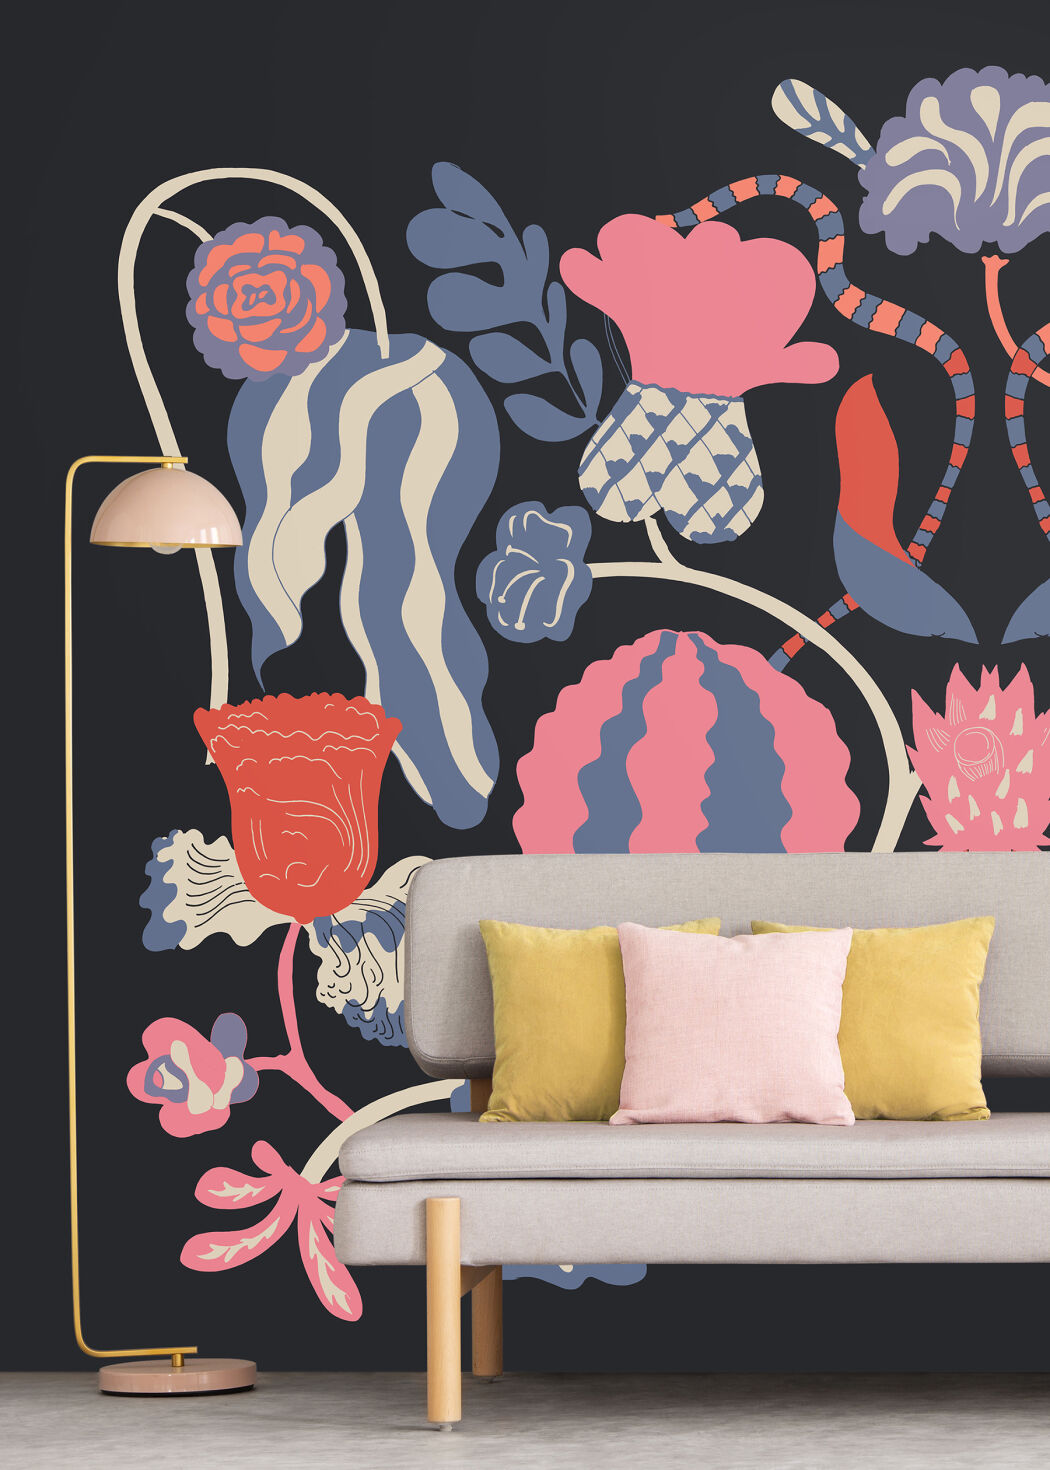 Wall mural by Erica Jacobson for Photowall